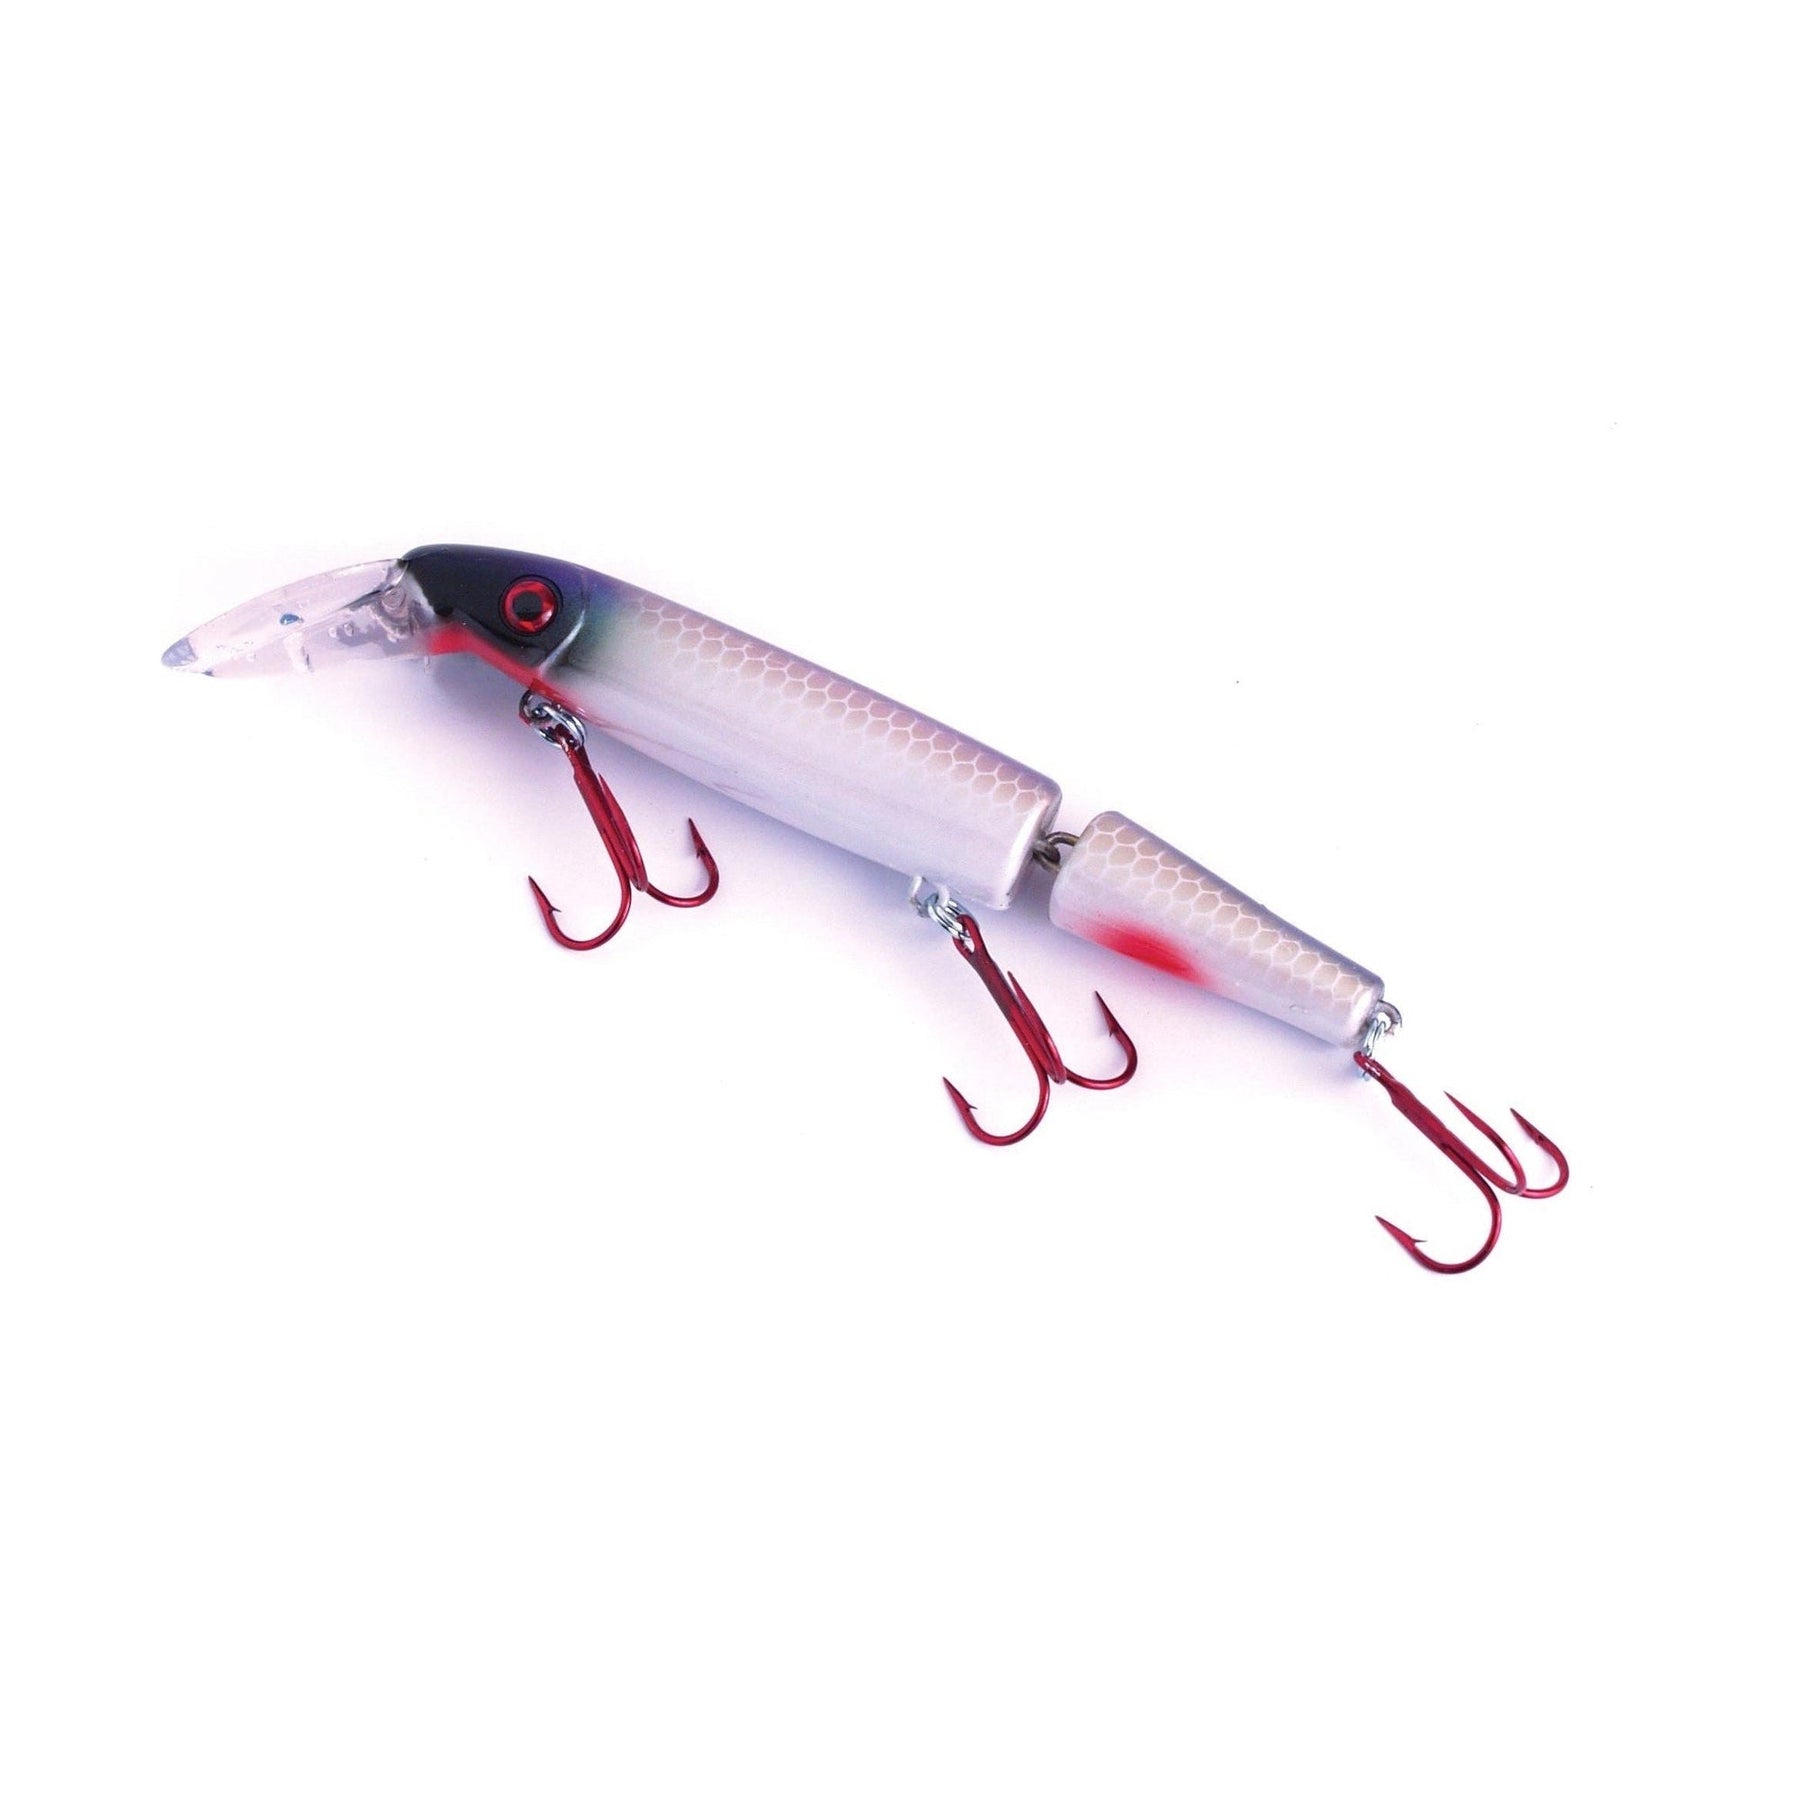 View of Crankbaits Suick Wrangler Cisco Kid Sucker available at EZOKO Pike and Musky Shop